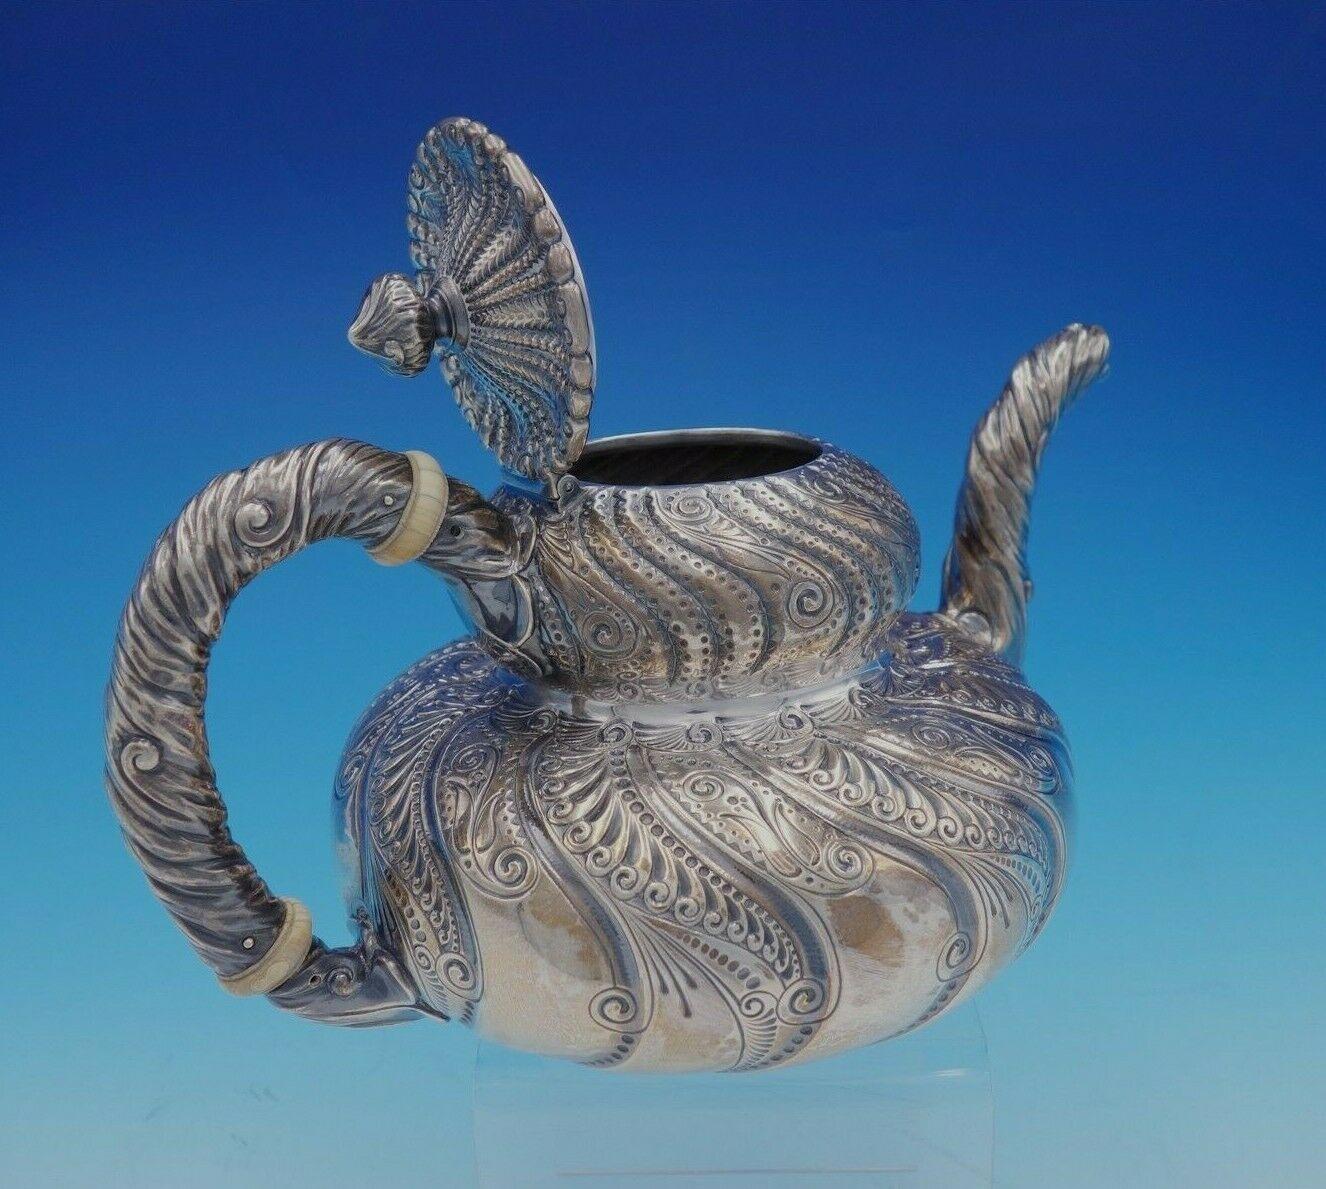 Saint Cloud by Gorham Sterling Silver Tea Set 5-Piece #1810 with Swirled Body 1